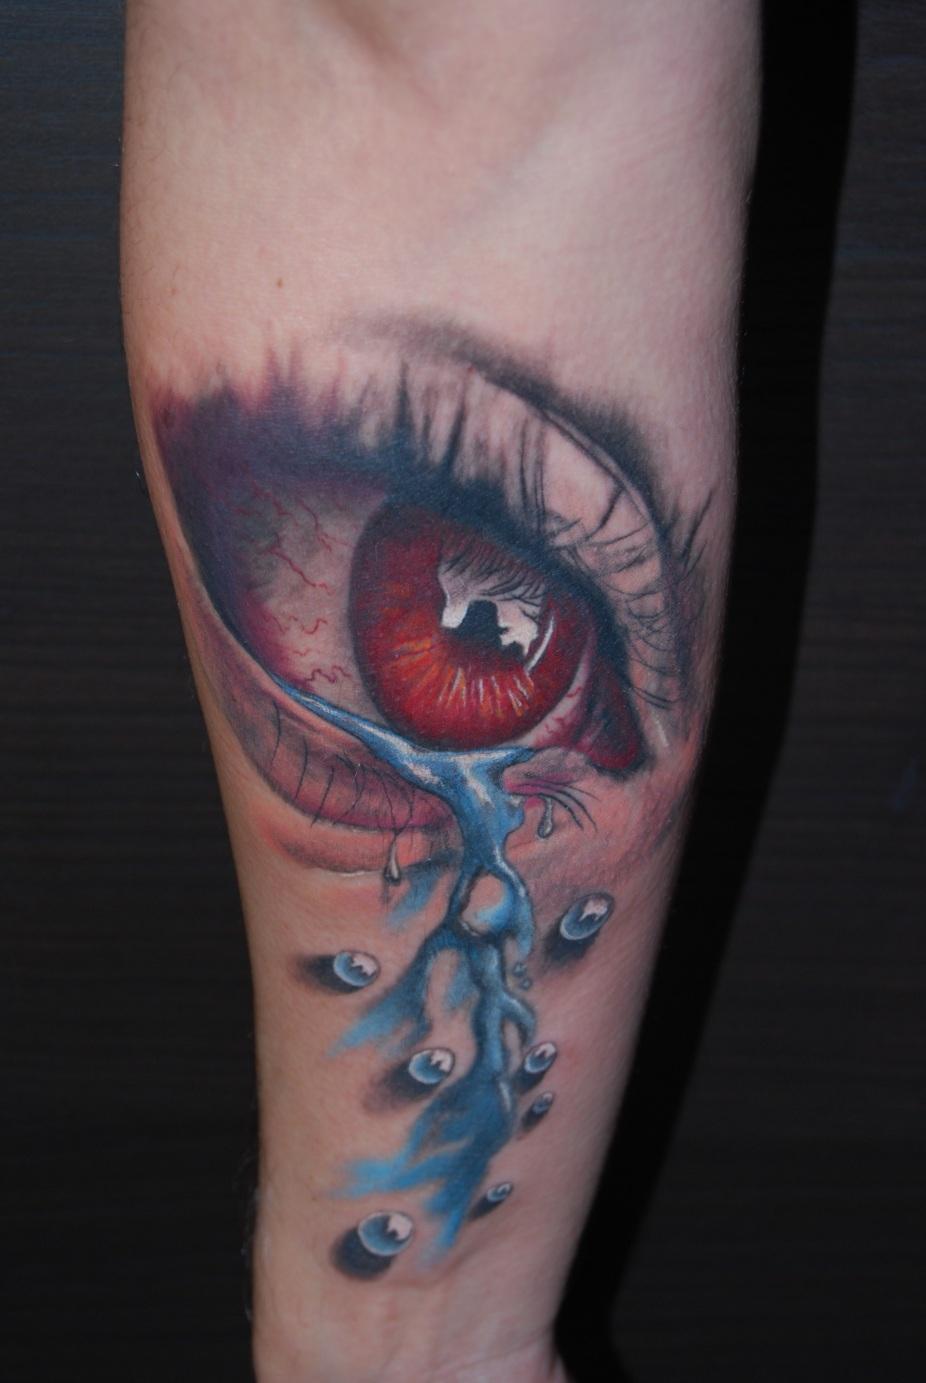 3D Crying Eye Tattoo On Forearm